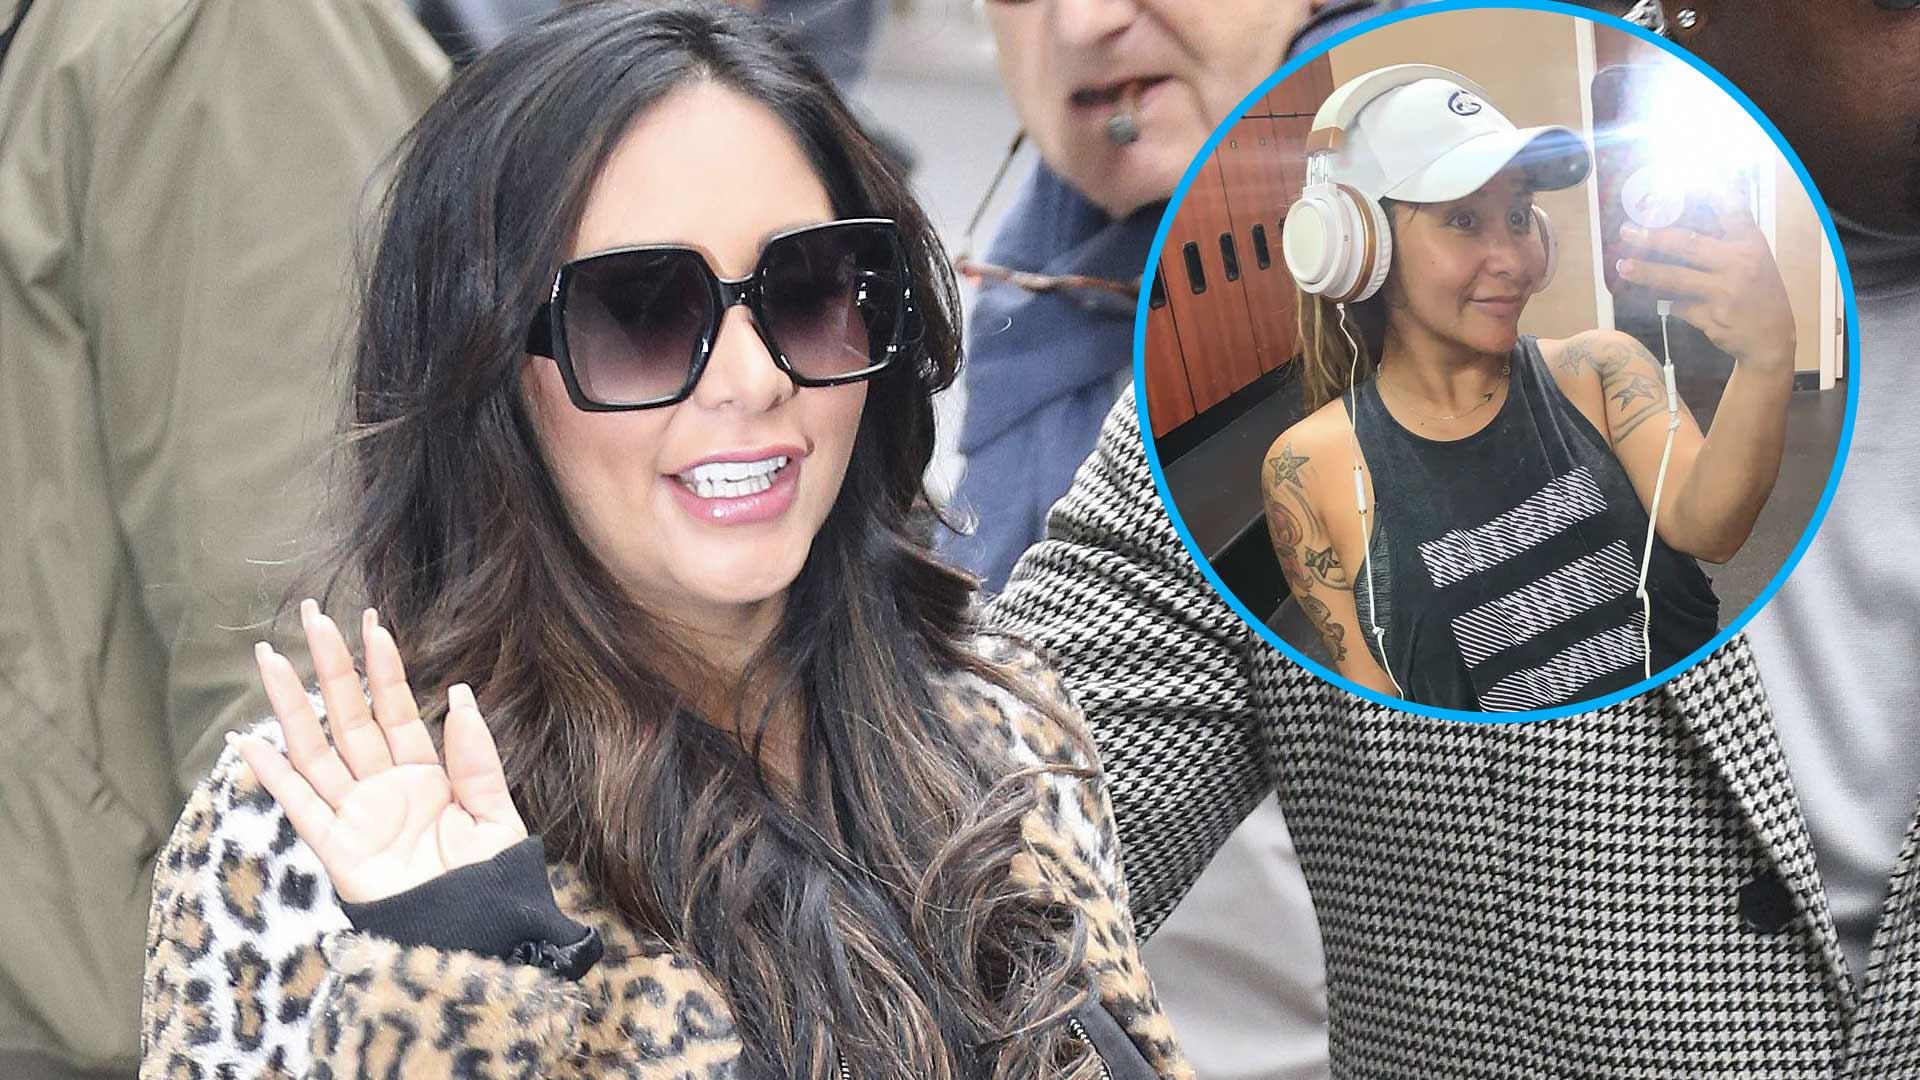 Snooki Shows Off Slim Figure After Hitting The Gym 5 Days A Week: ‘Mawma Is Back At It’